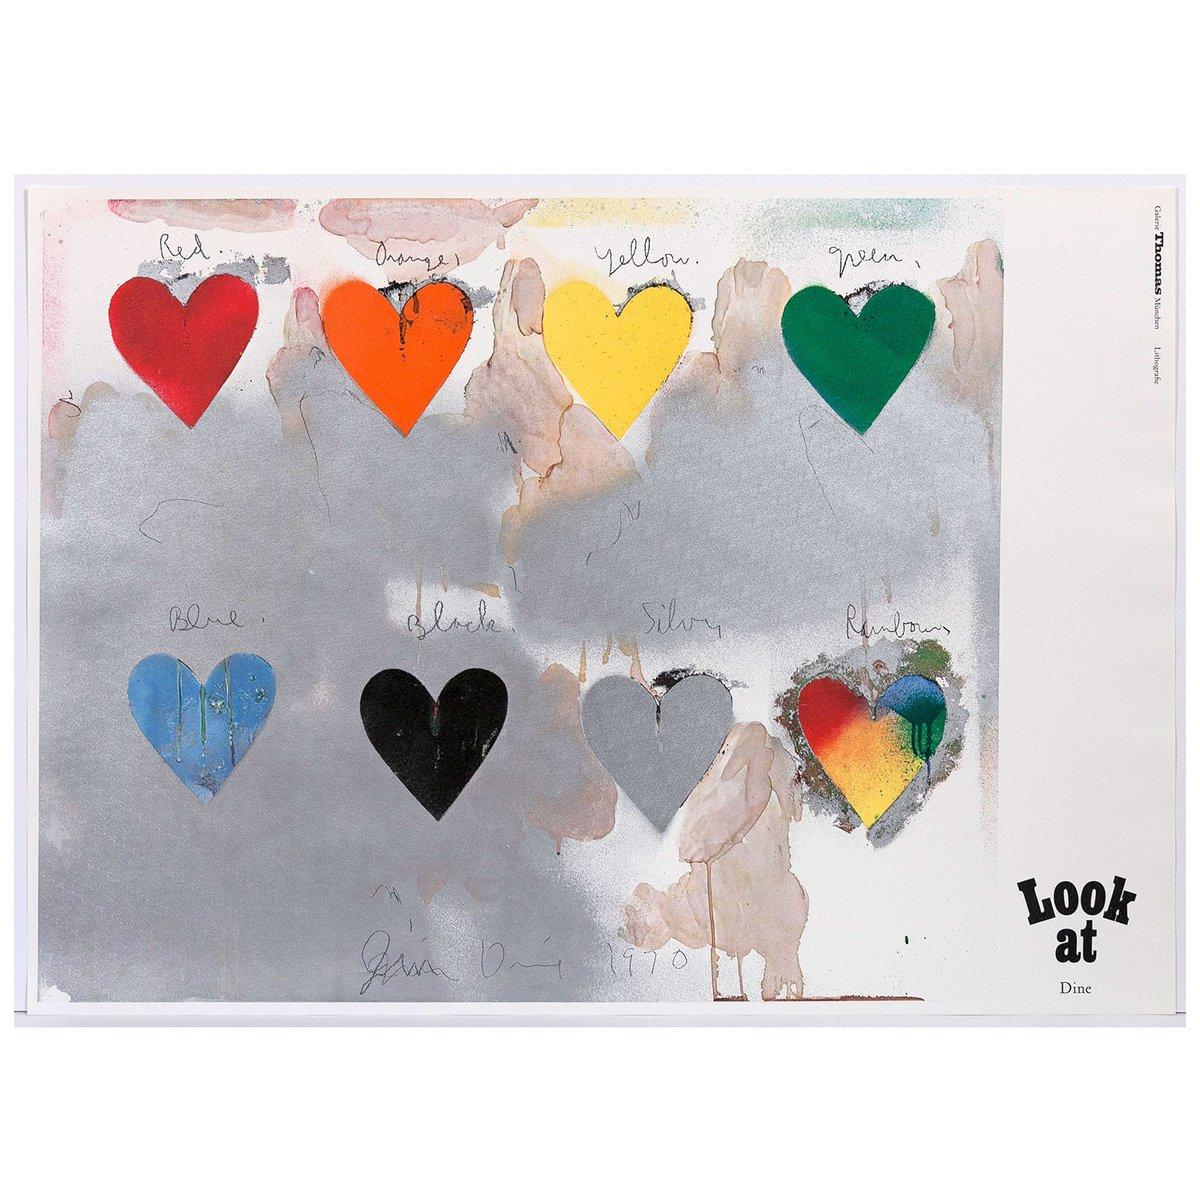 Jim Dine Print - 8 Hearts / Look, Off-set Lithograph with metallic paper collage overlay, 1970